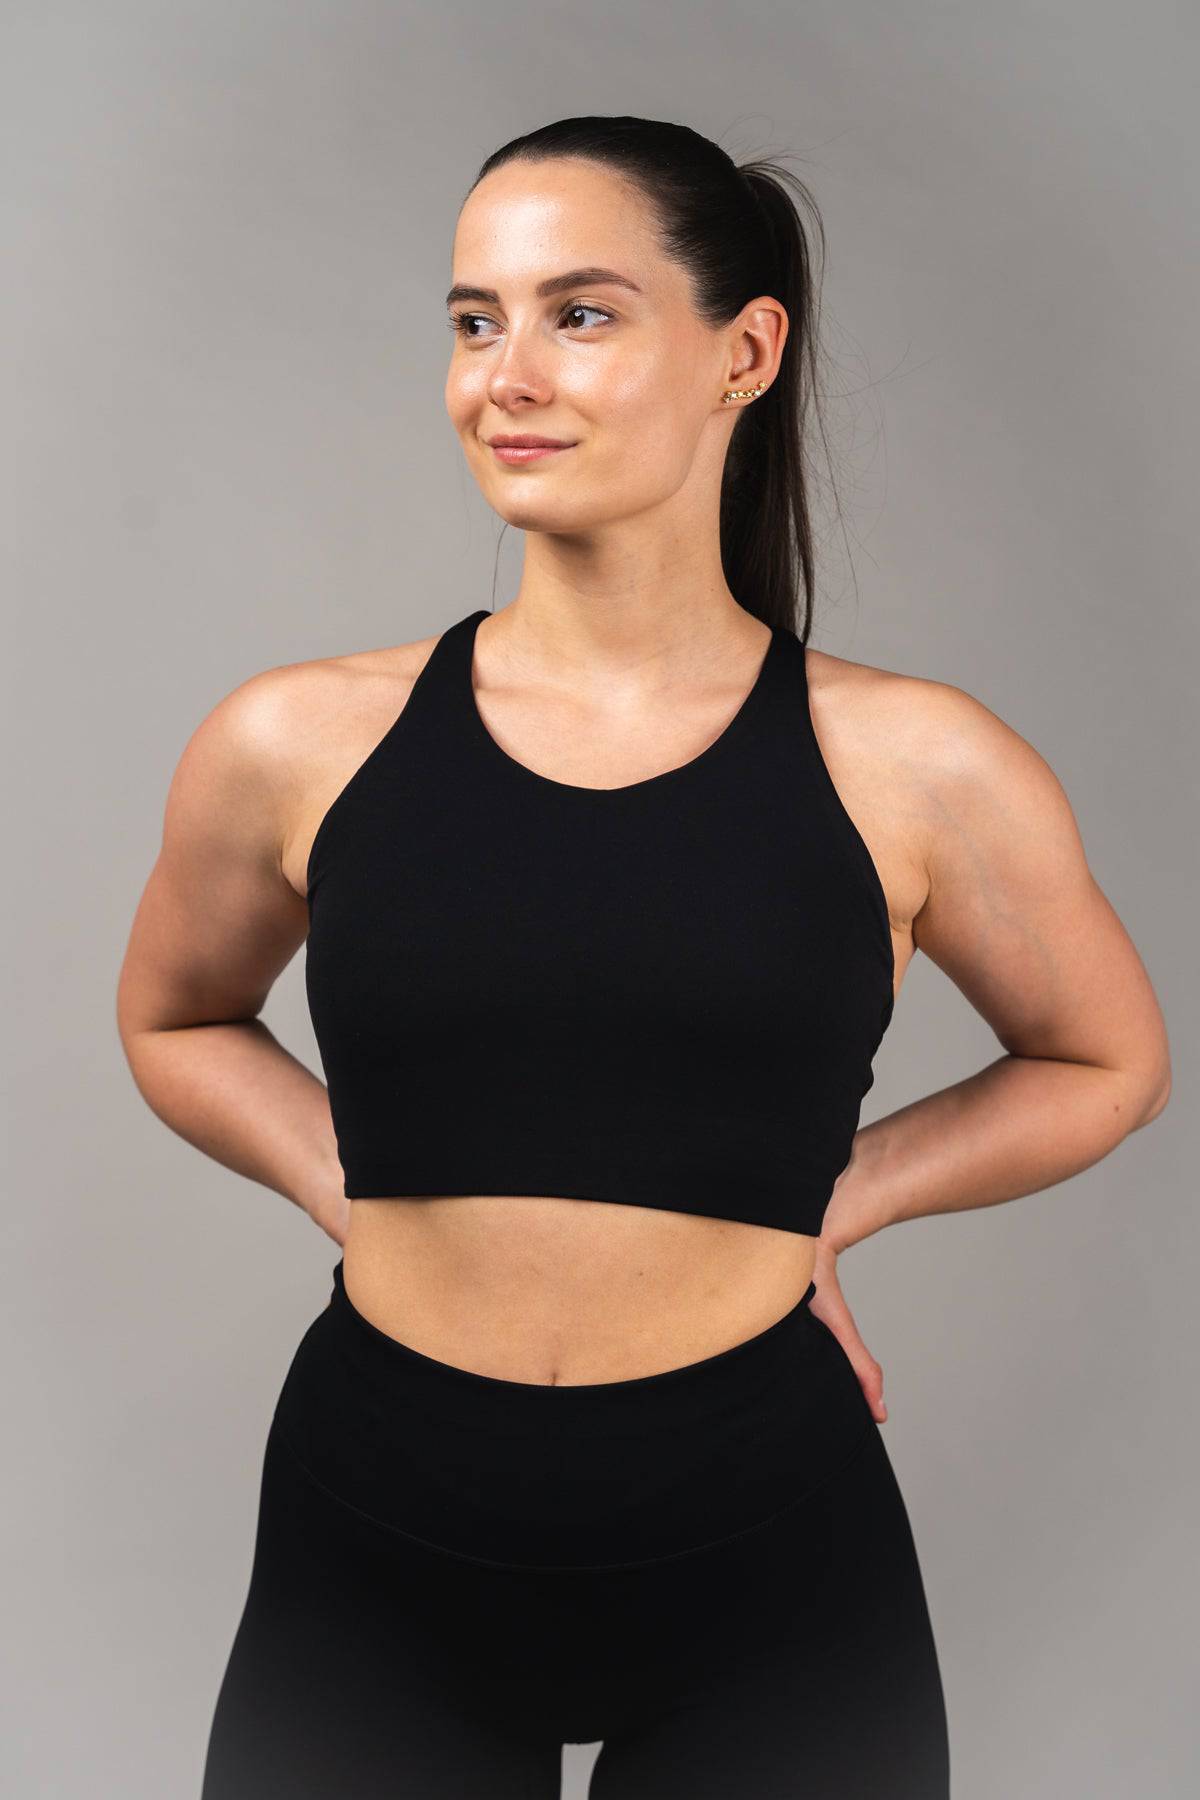 Pure High Neck Sport BH - Lifters Wear